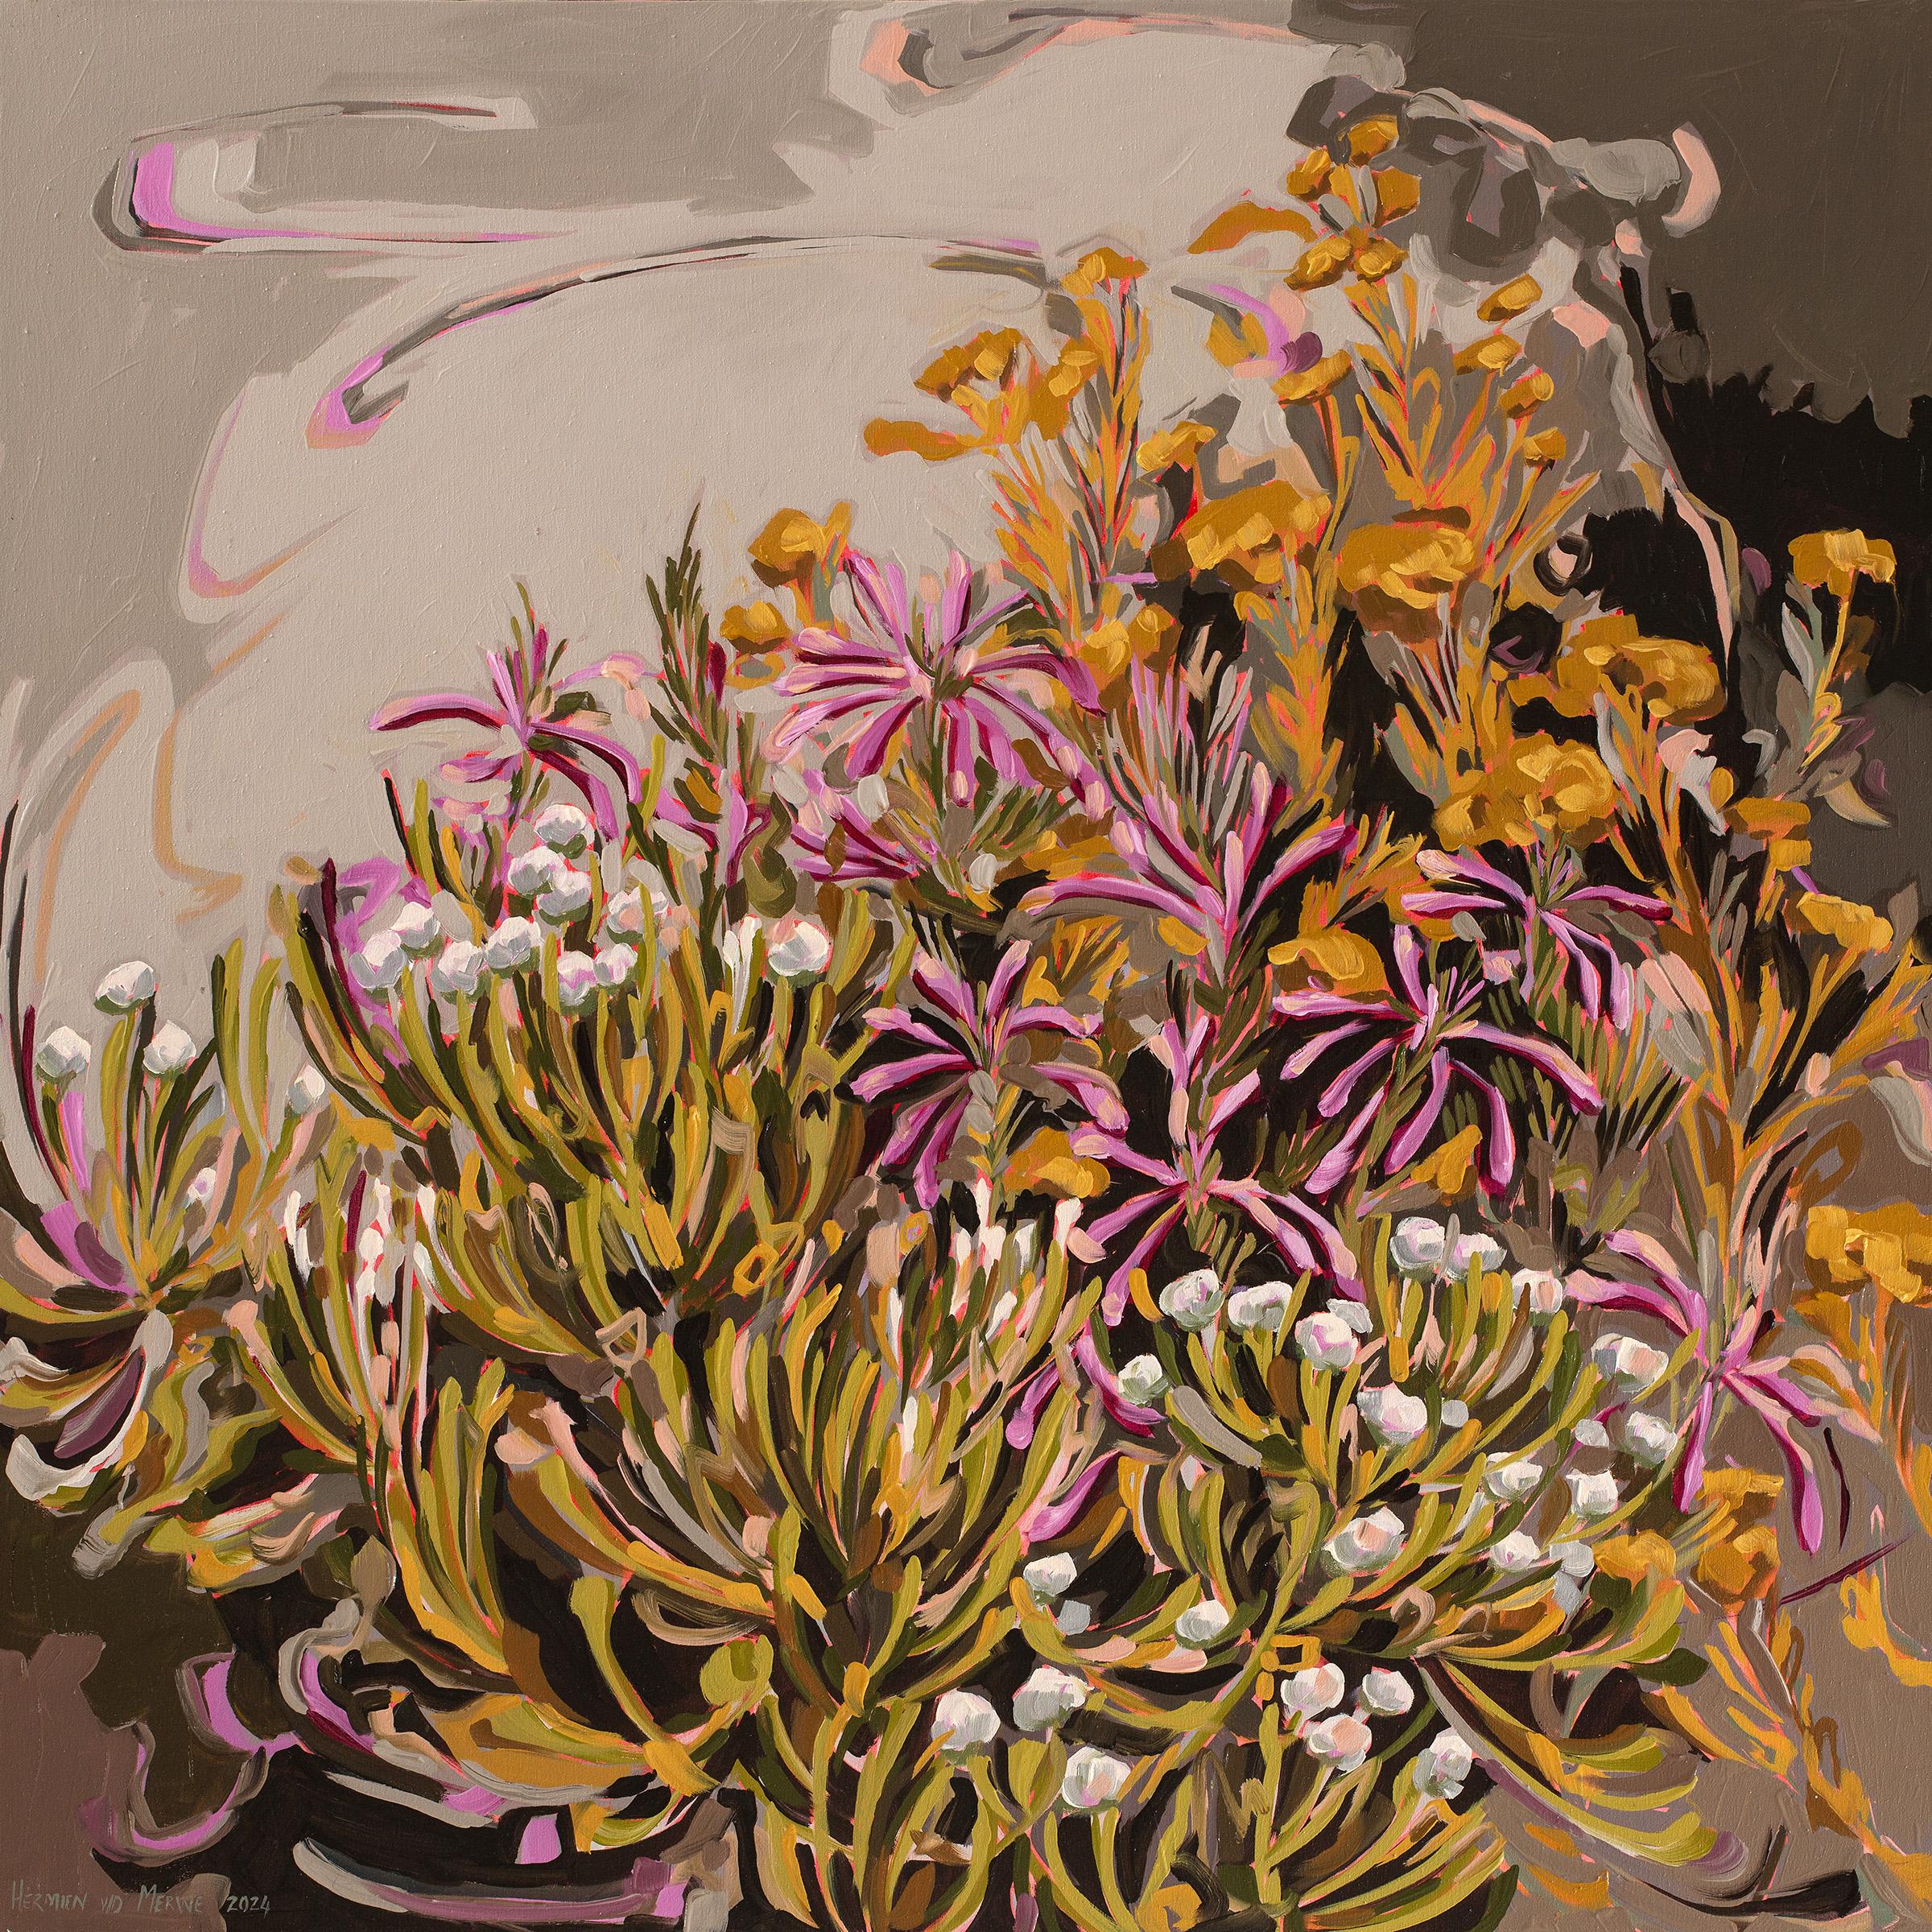 Erica, Helichrysum and Brunia (Amplify series) 800x800mm